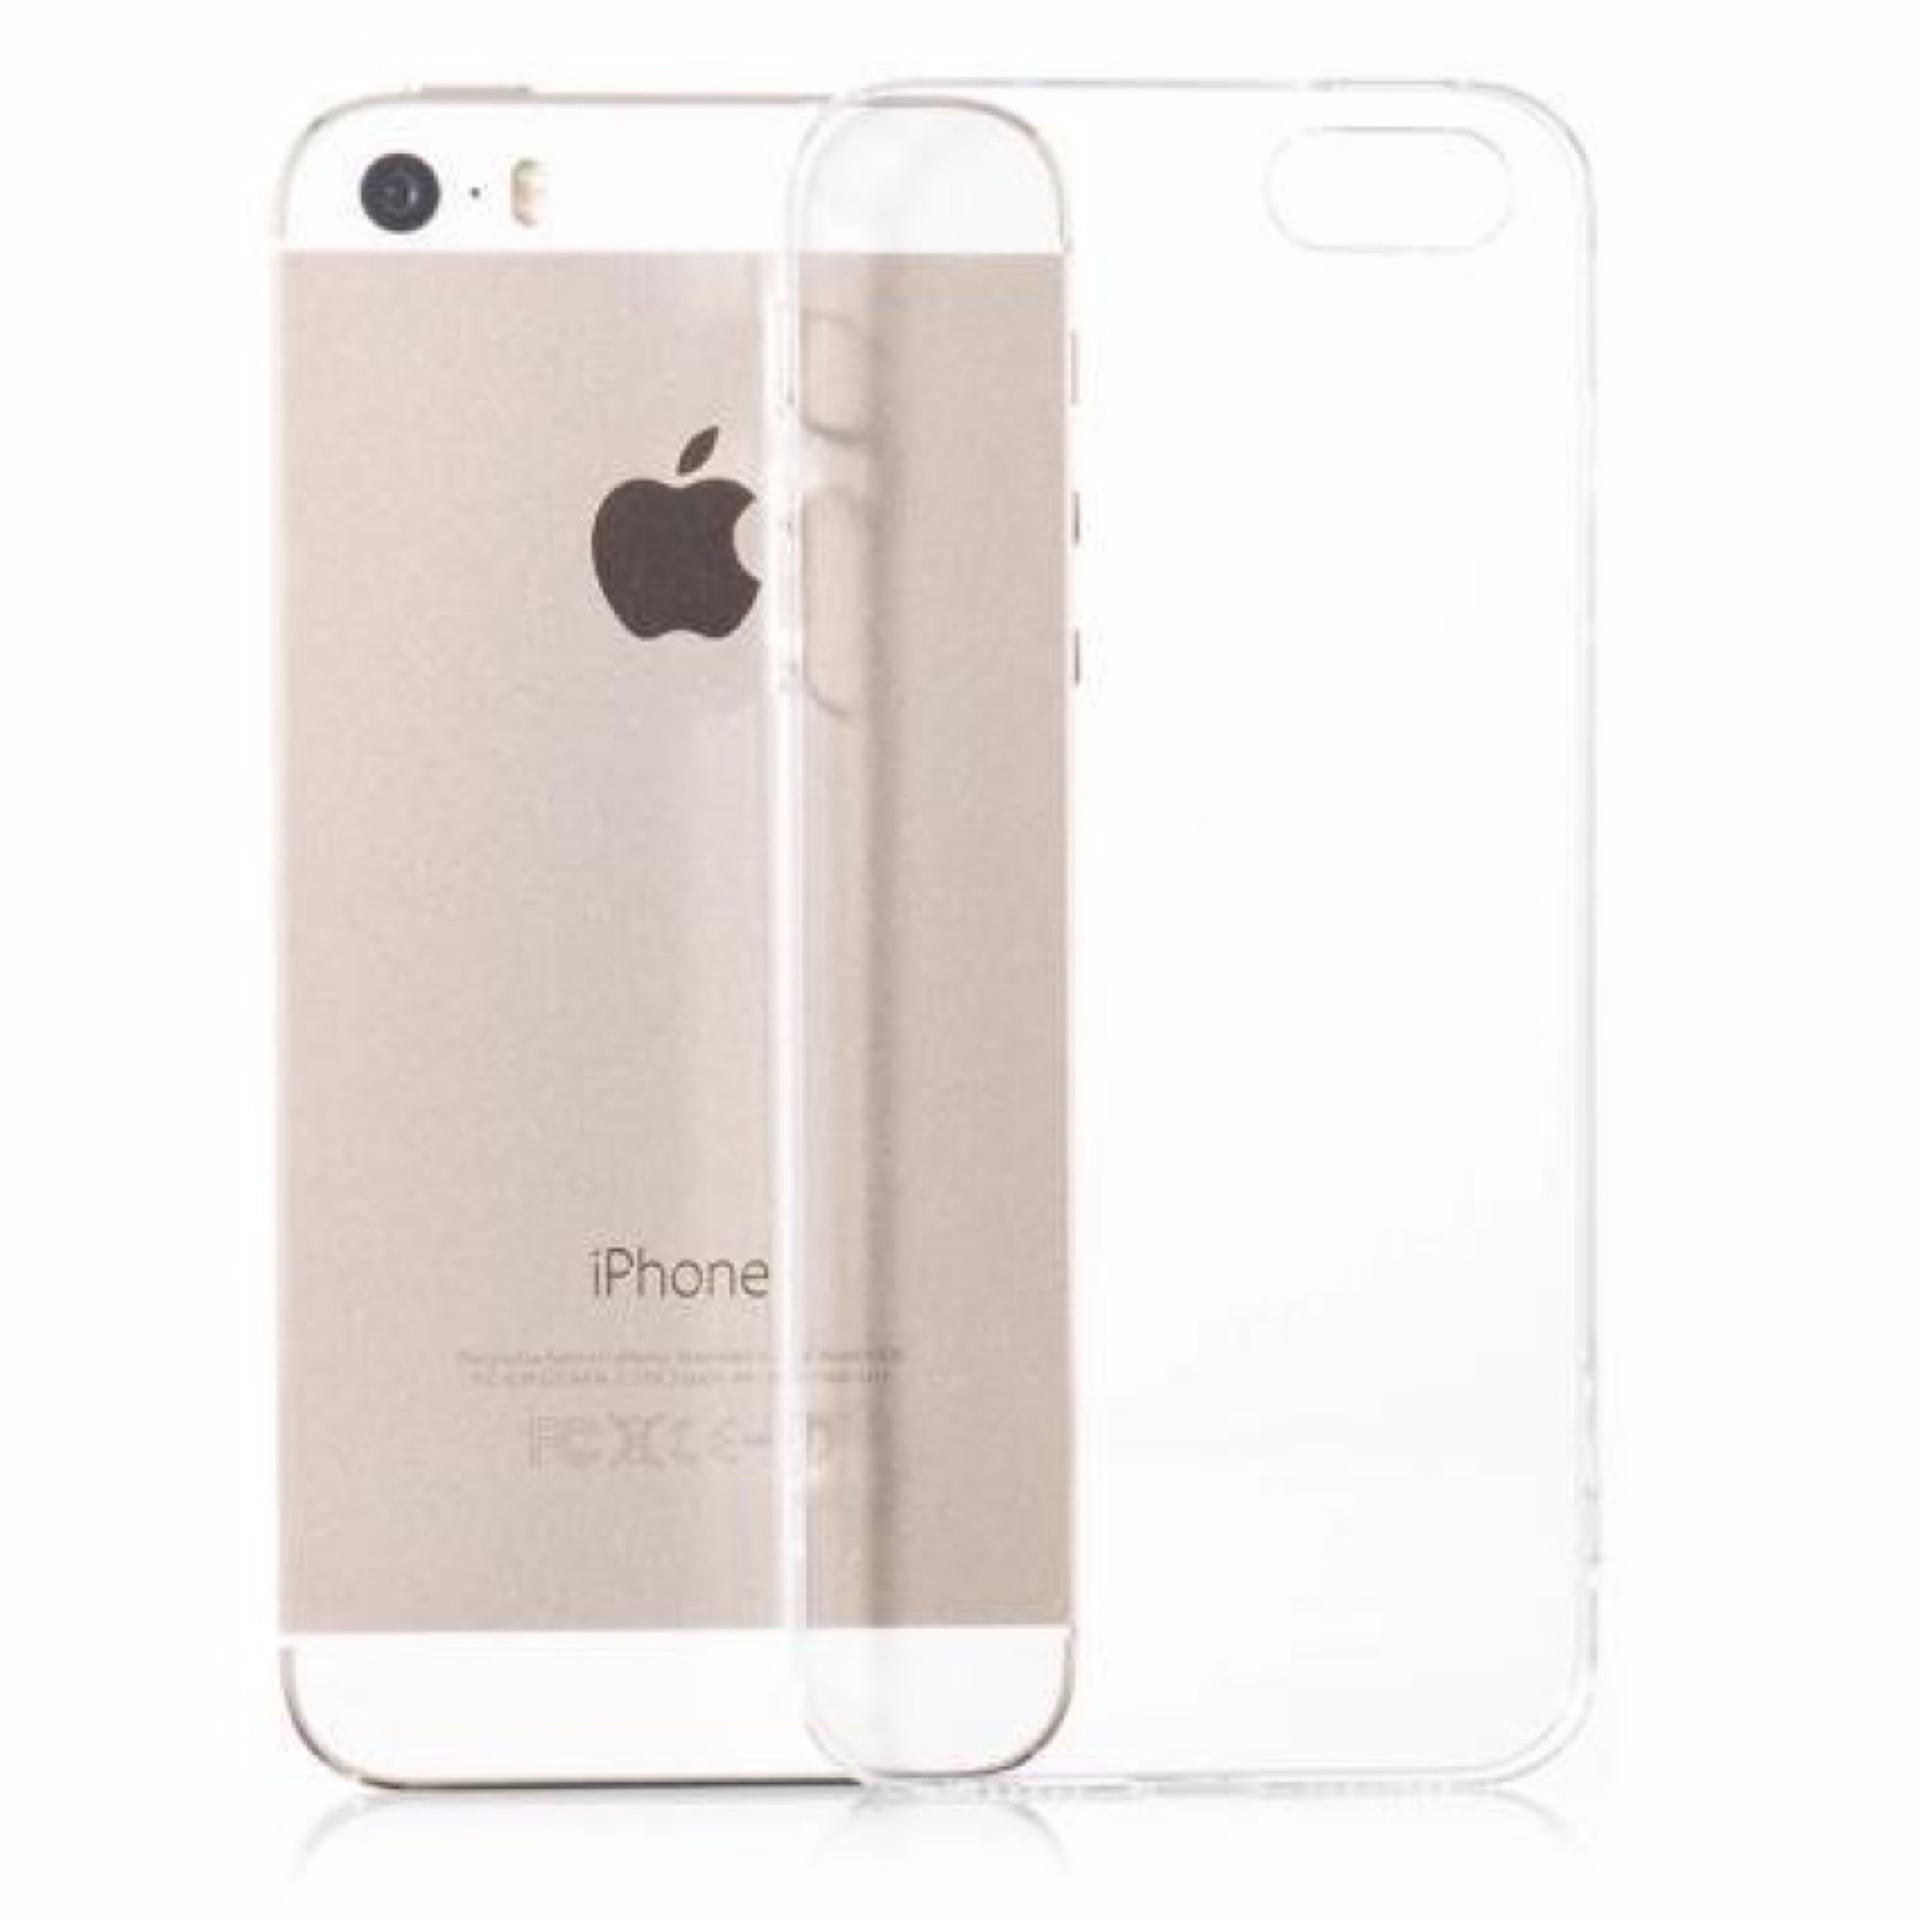 Ốp lưng silicon dẻo cho iPhone 5 5S SE (Trong suốt)